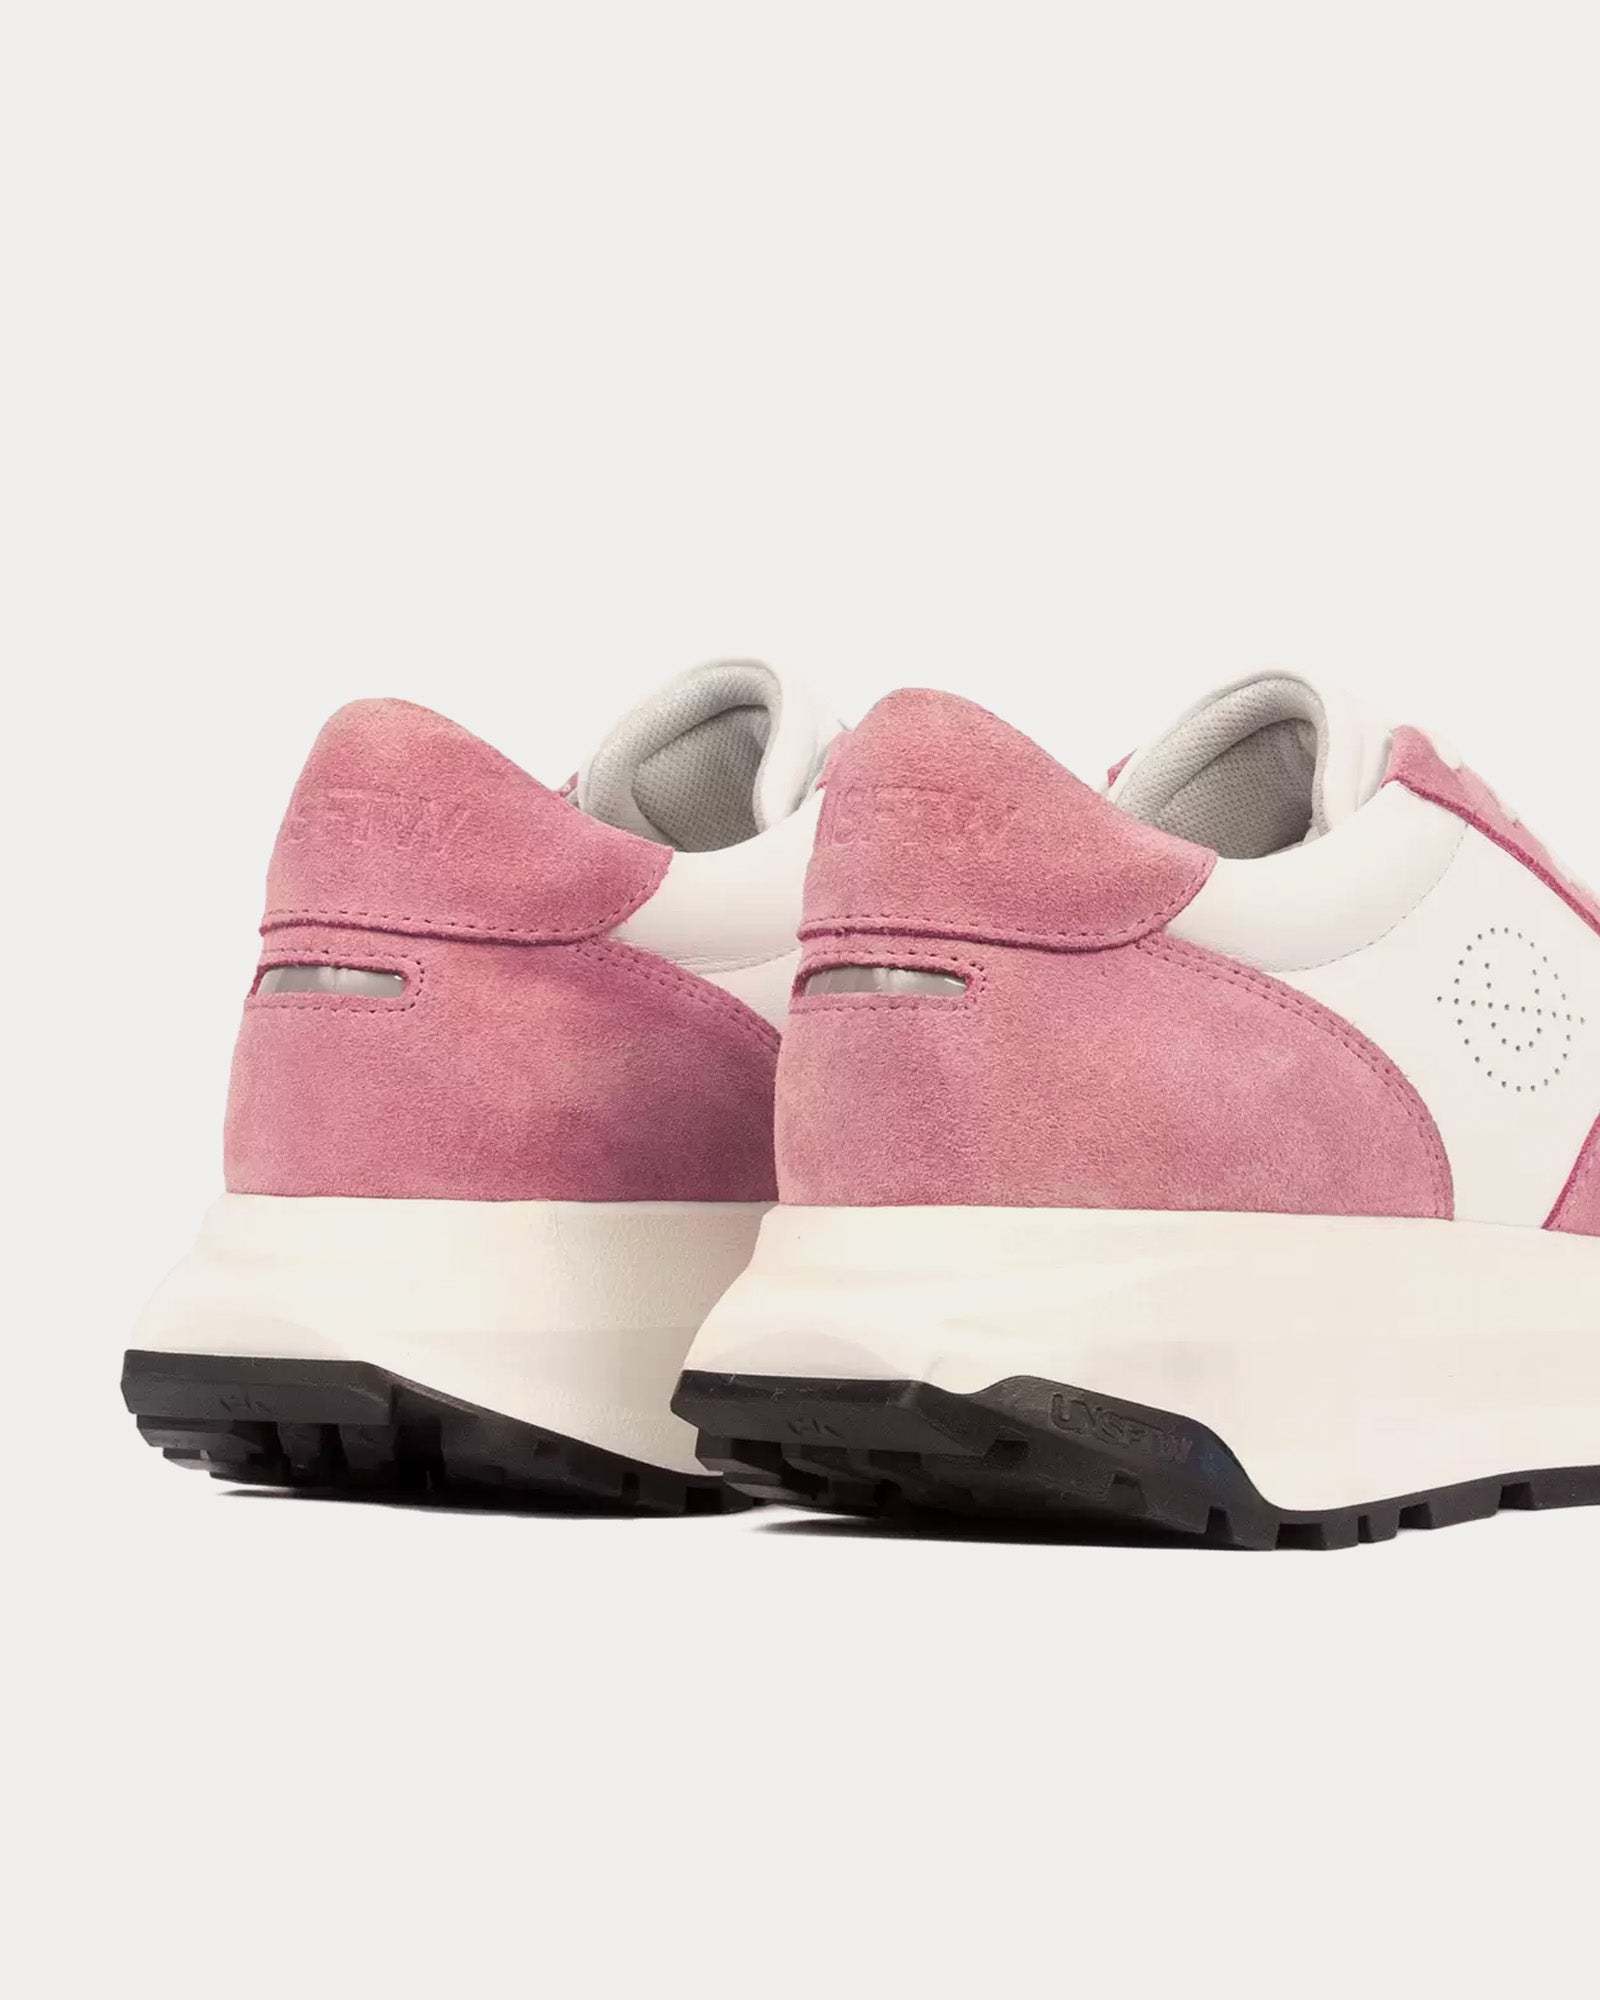 Unseen Footwear - Trinity Leather & Suede Pink / White Low Top Sneakers